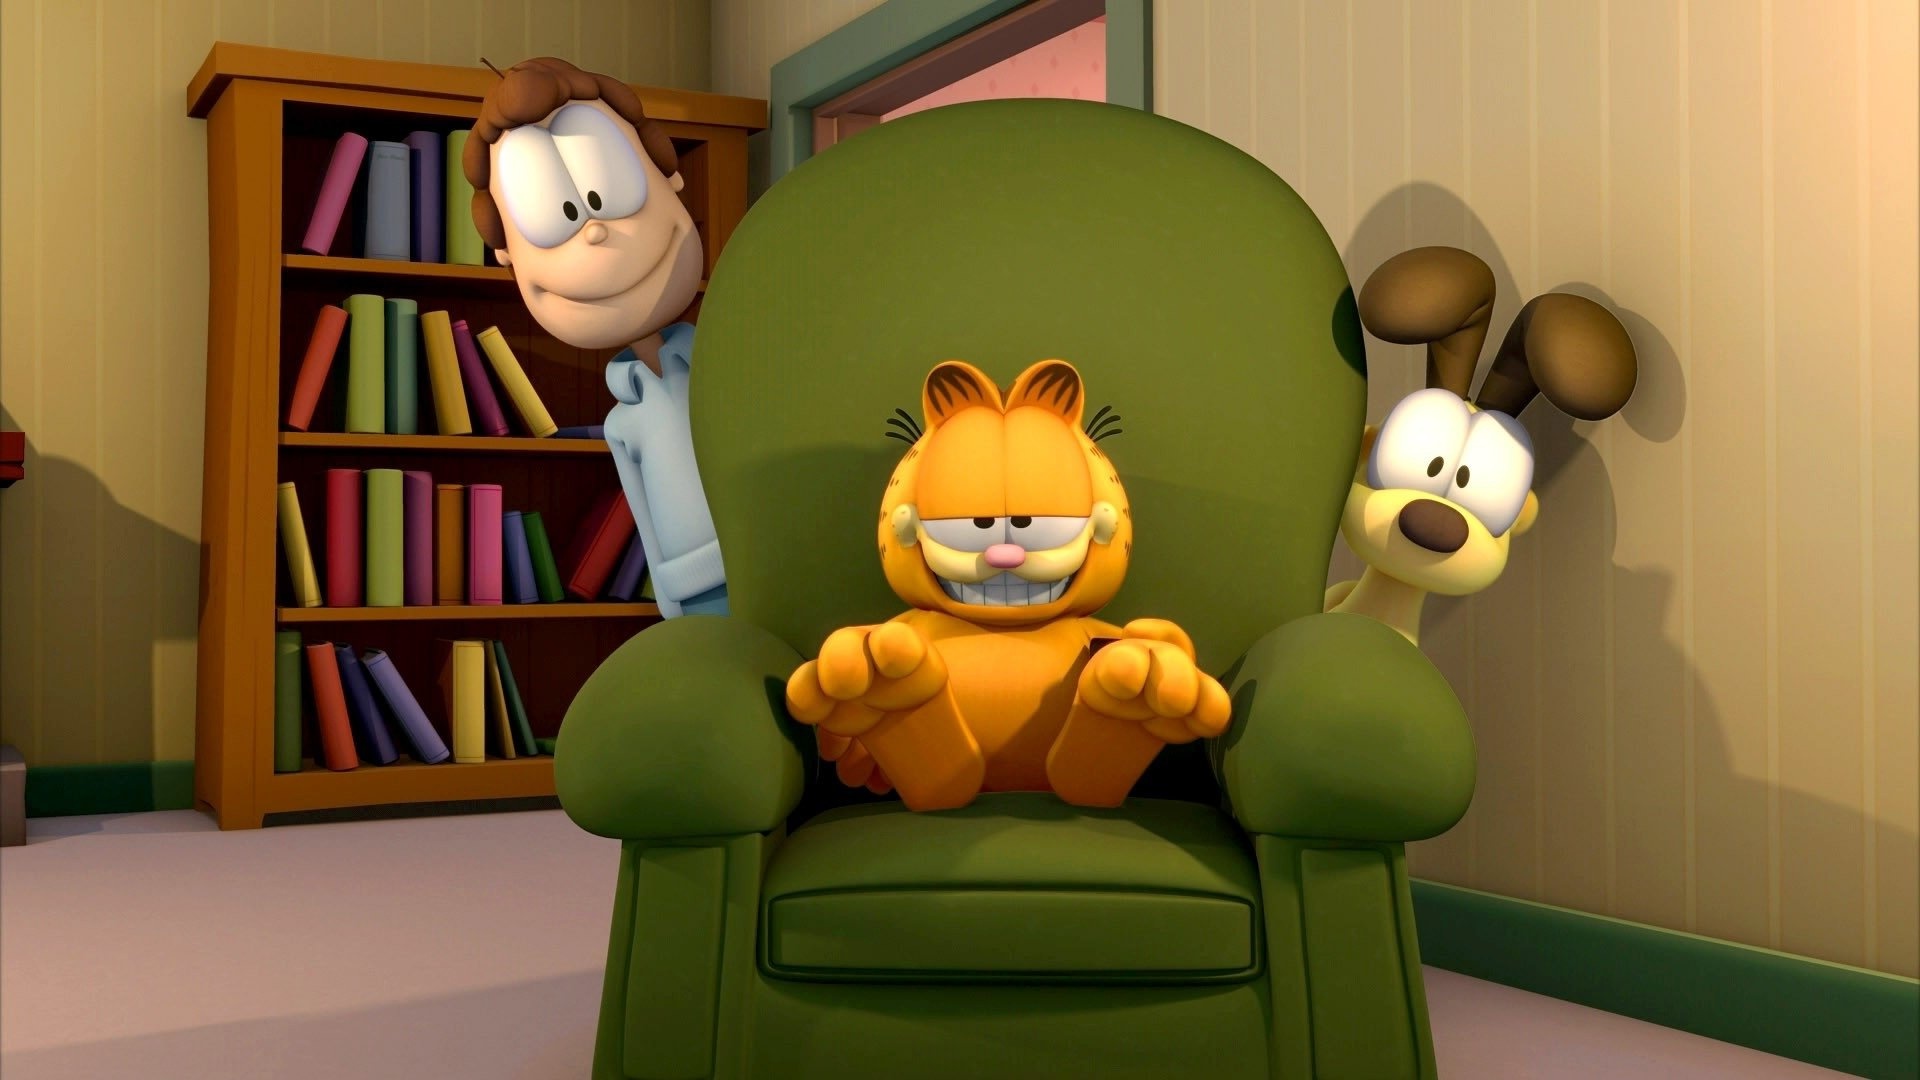 Garfield: A CGI animated television series, Adventures of the orange cat and his owner Jon Arbuckle. 1920x1080 Full HD Background.